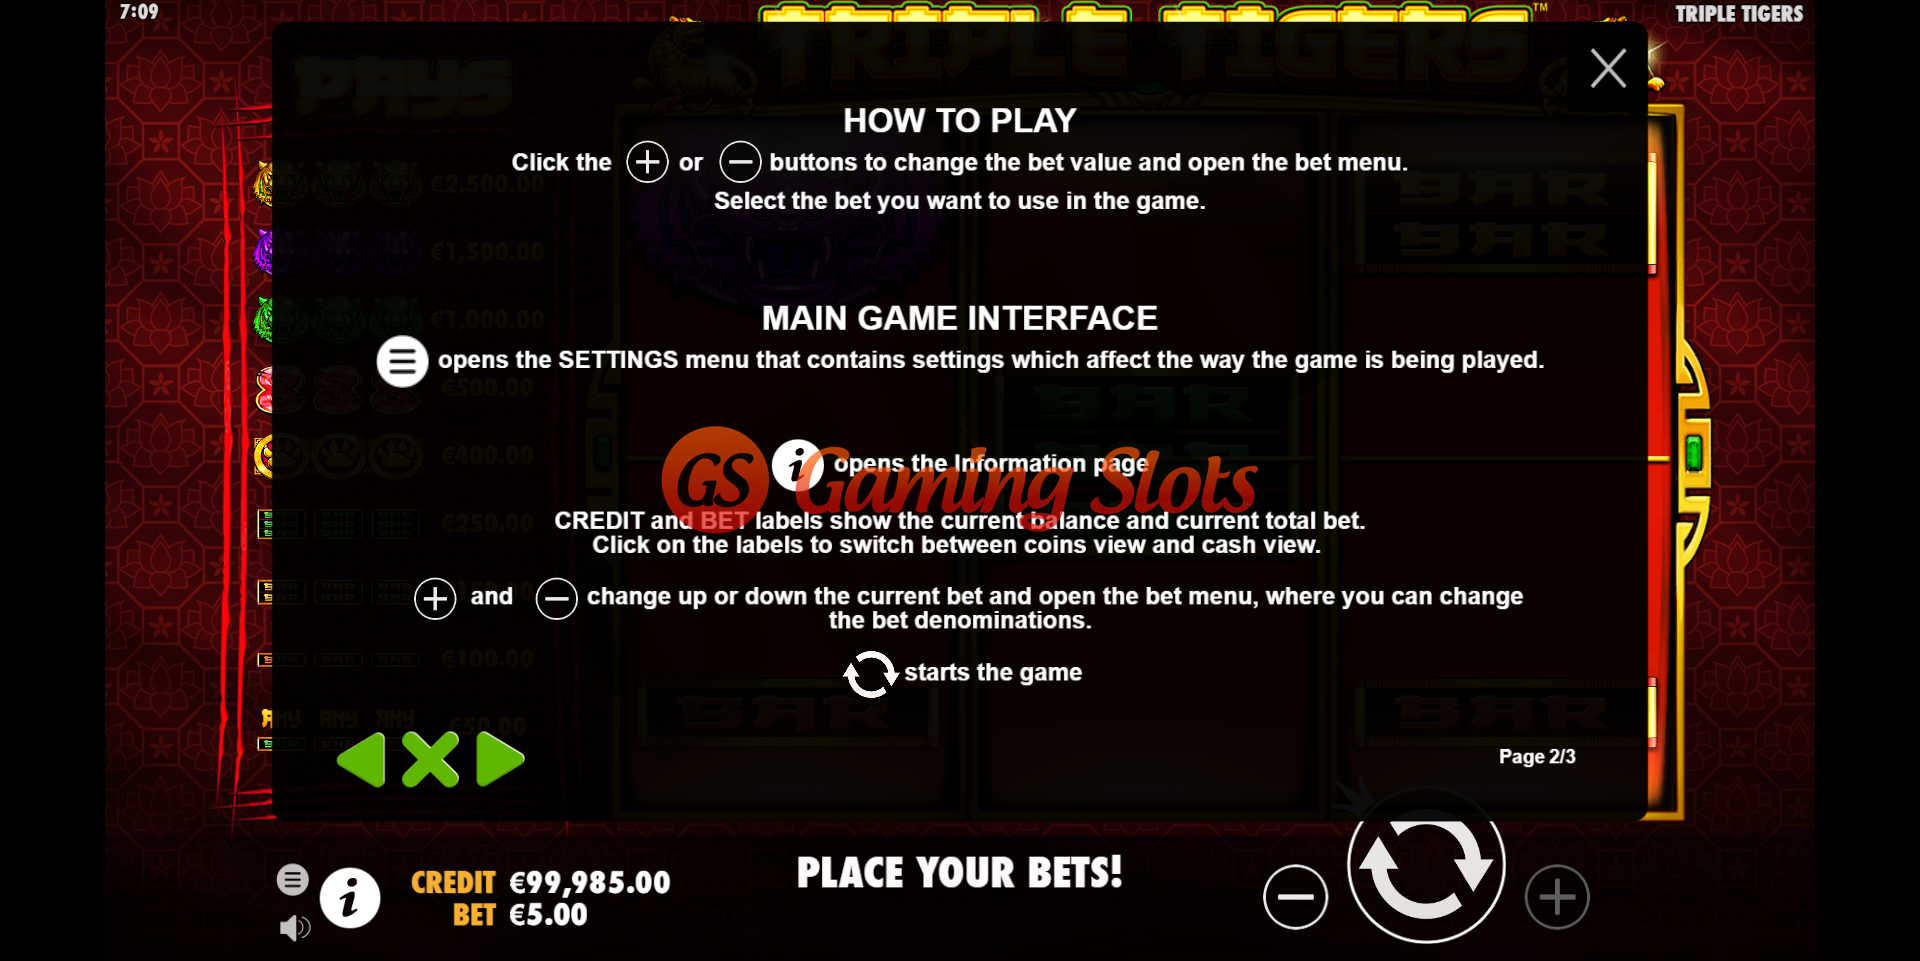 Pay Table for Triple Tigers slot from Pragmatic Play